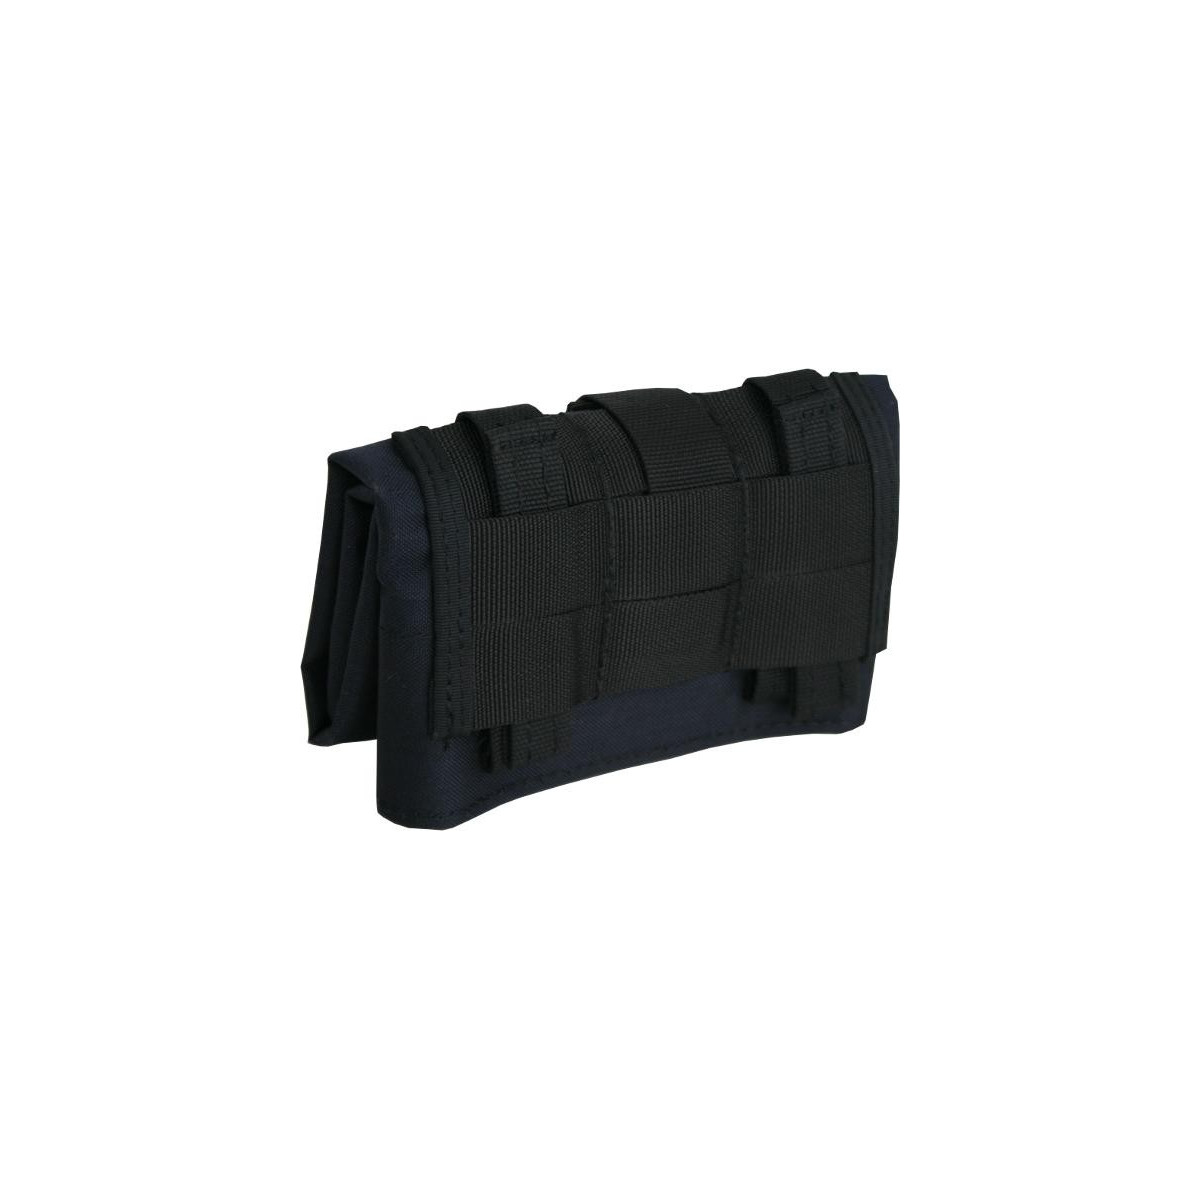 Dump pouch 5 liters for ammunition and magazines with MOLLE-System